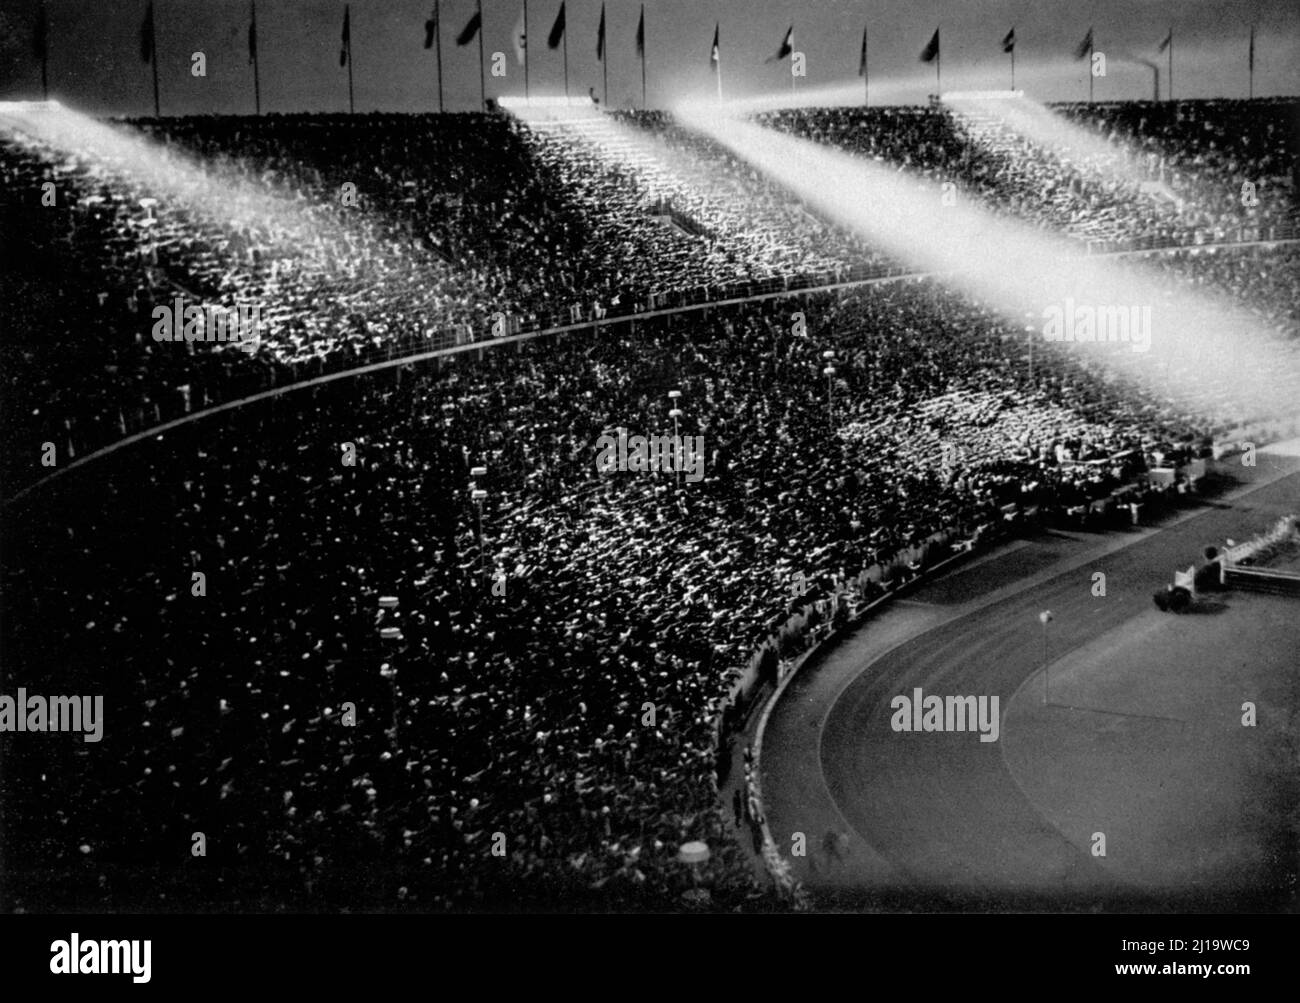 The spotlights chase beams of light over the crowds, fanfares cut the ribbons of the night like swords. . text of the coverage of the closing ceremony Stock Photo